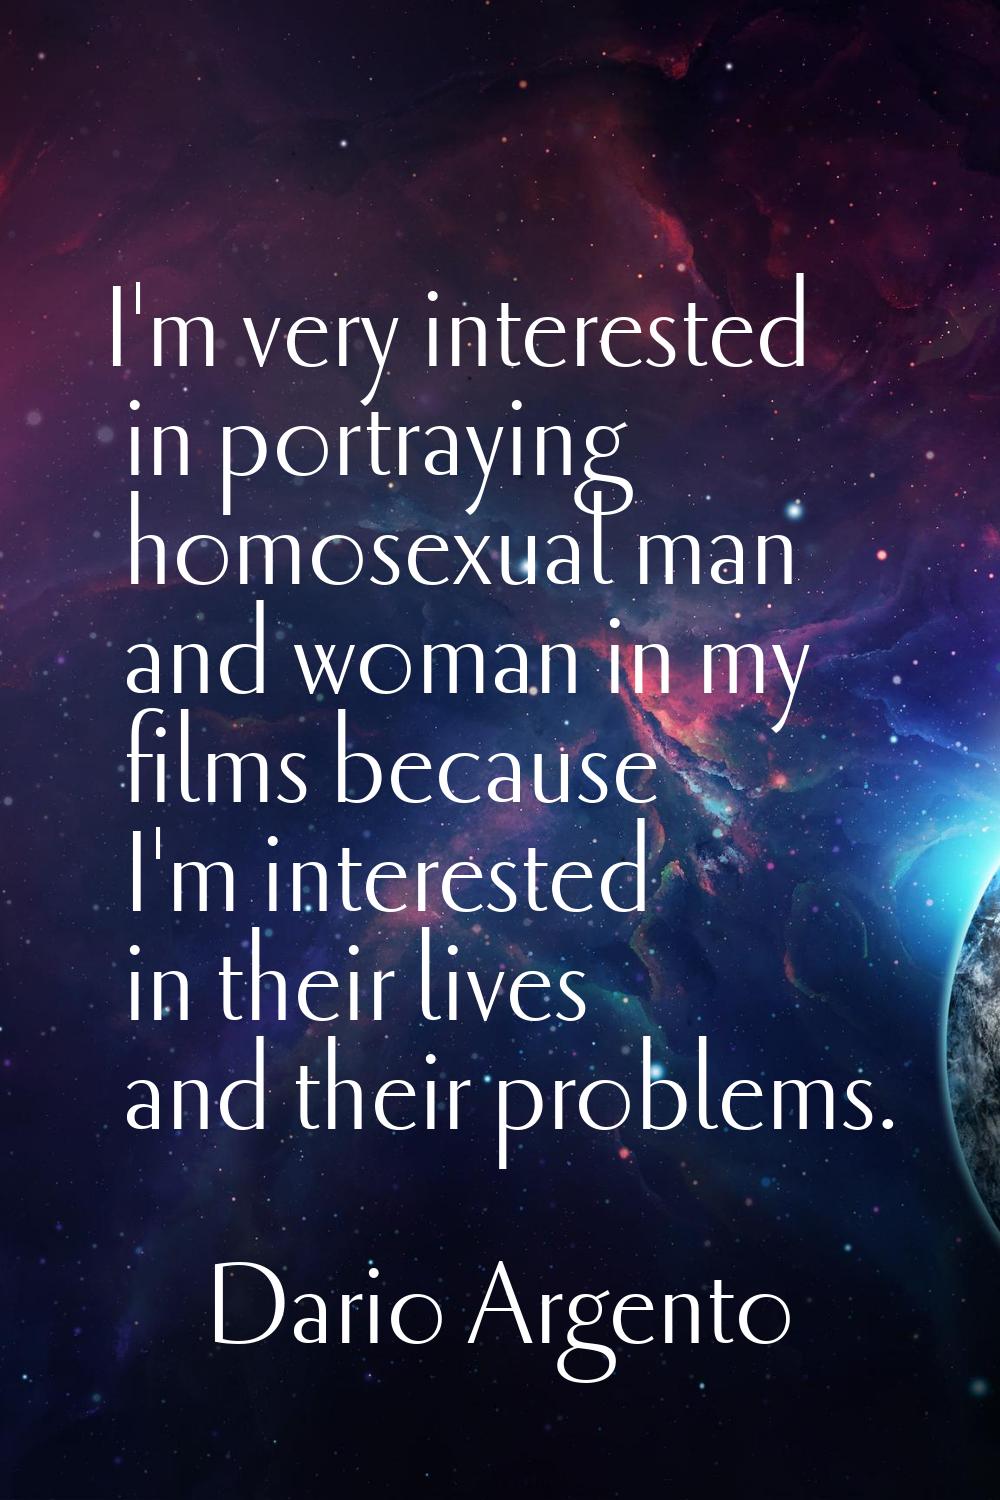 I'm very interested in portraying homosexual man and woman in my films because I'm interested in th